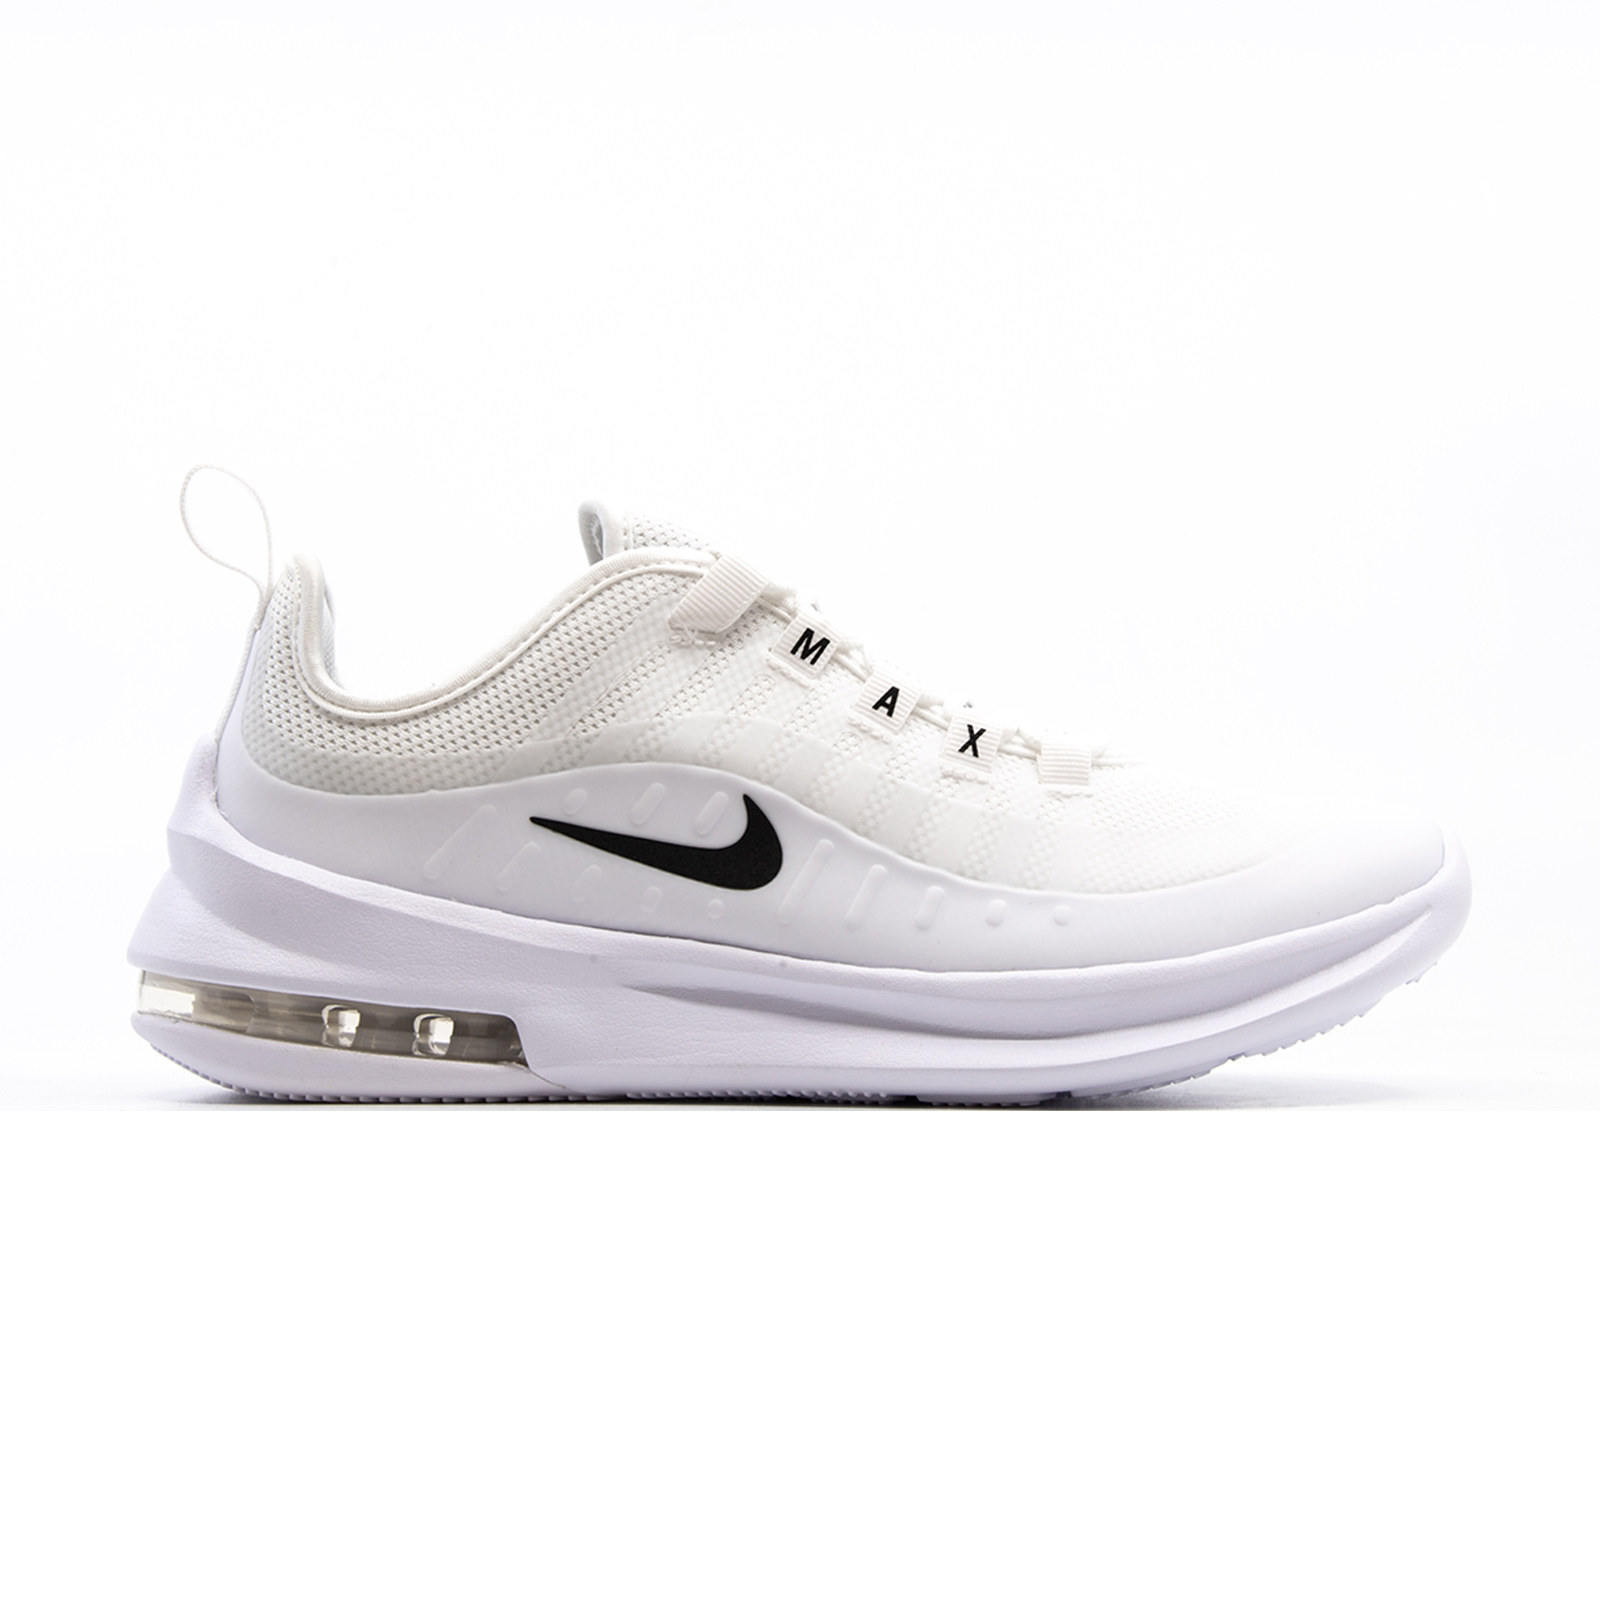 Descent bribe Frown Nike Air Max Axis (gs)